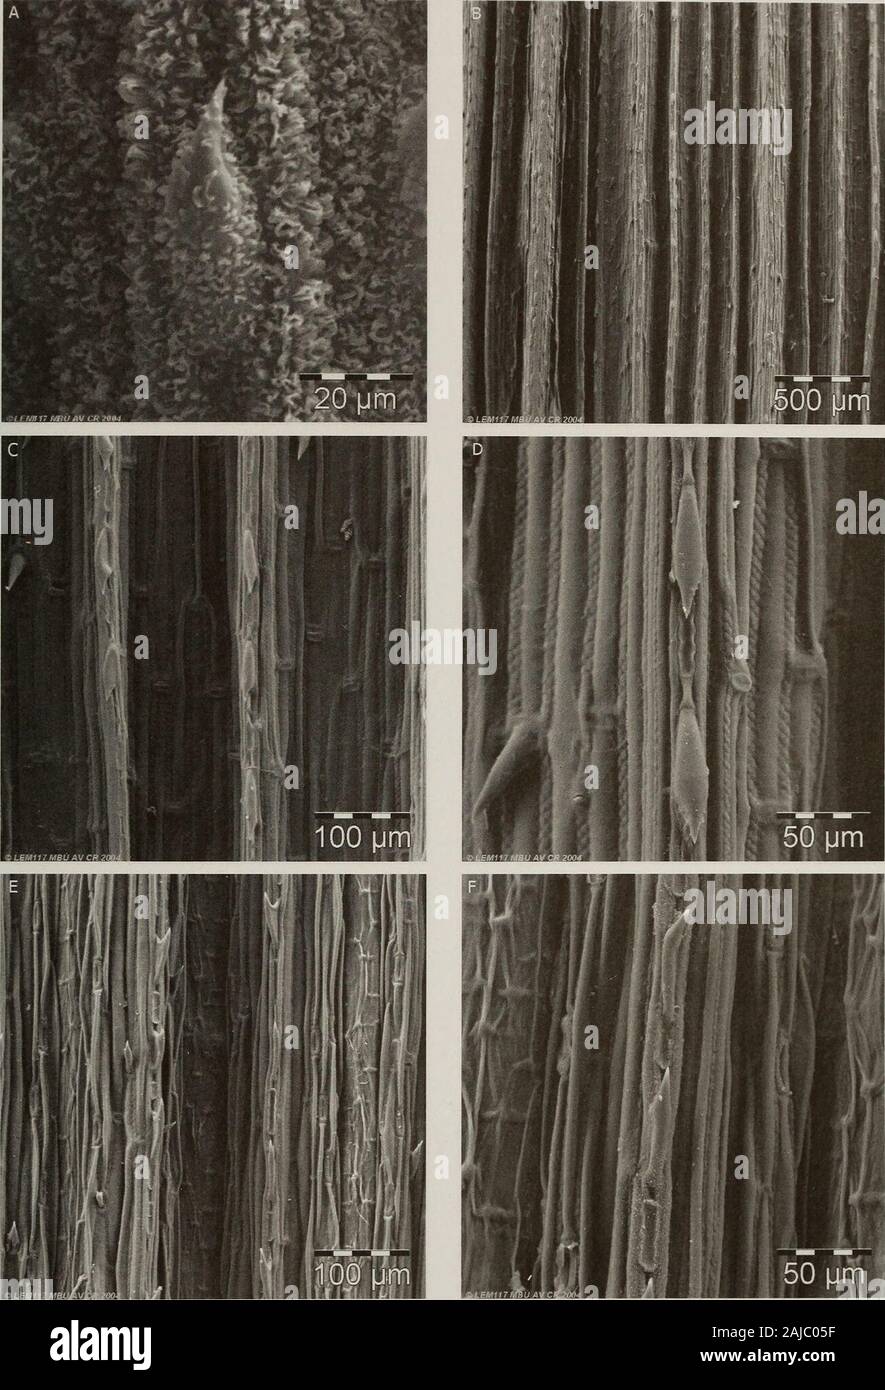 Contributions from the United States National Herbarium . Figure 79. Leaf blade surfaces. A & B. Festuca arundinacea. A. Adaxial epidermis with rows of stomata between small ribs. B. Adaxial epidermis, detail view of long cells interrupted by short cells (silica bodies and cork cells). C-F. F quadridentata. C. Abaxial epidermis covered by prickles. D. Abaxial epidermis with detail view of prickles and short cells. E. Adaxial epidermiswith pronounced ribs densely covered with prickles and wax. F. Adaxial epidermis with detail of wax and prickles. A & B, Stancik3221 (PRC); C-F, Laegaard & Sklend Stock Photo